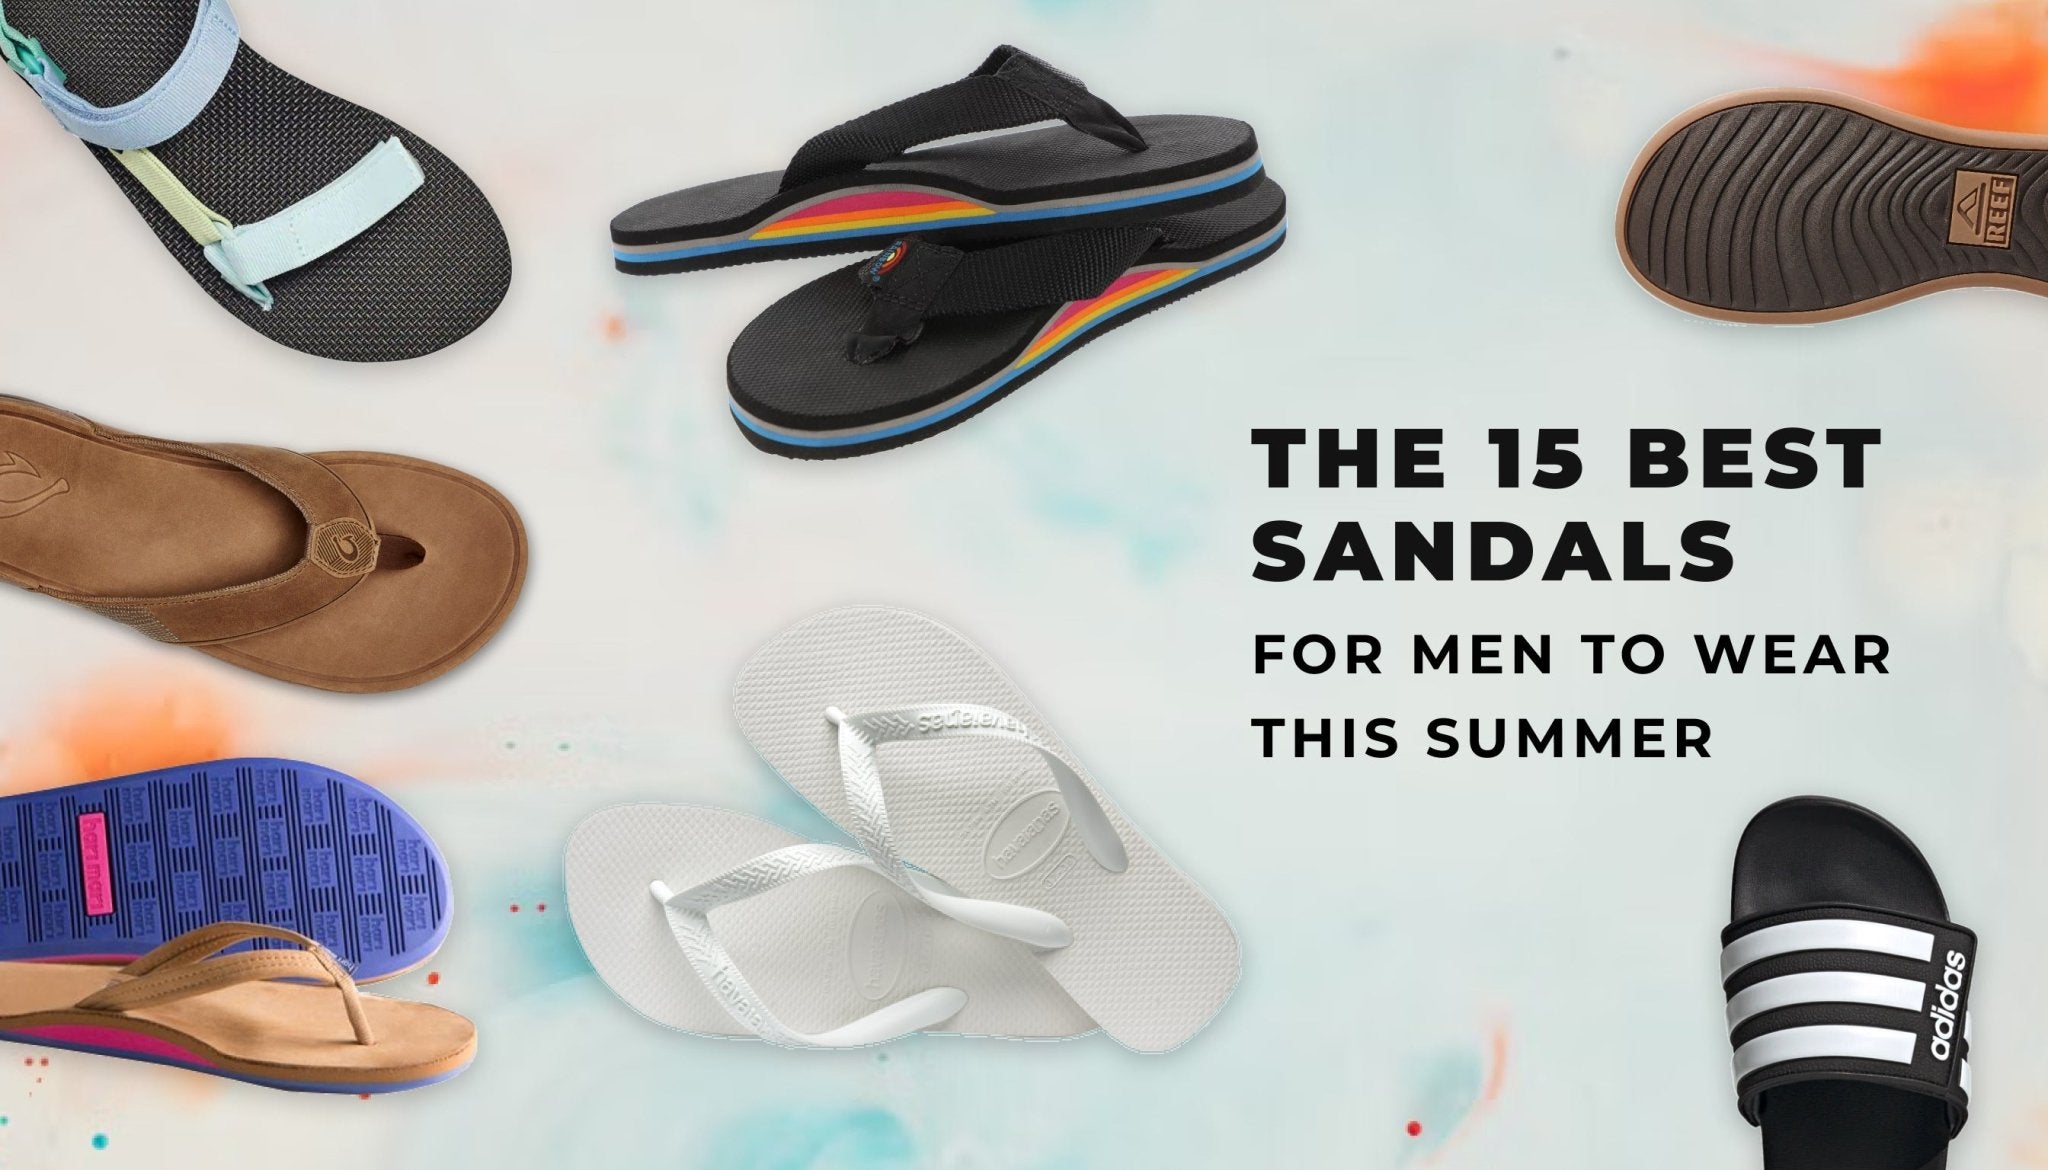 The 15 Best Sandals for Men to Wear this Summer - Elegatto